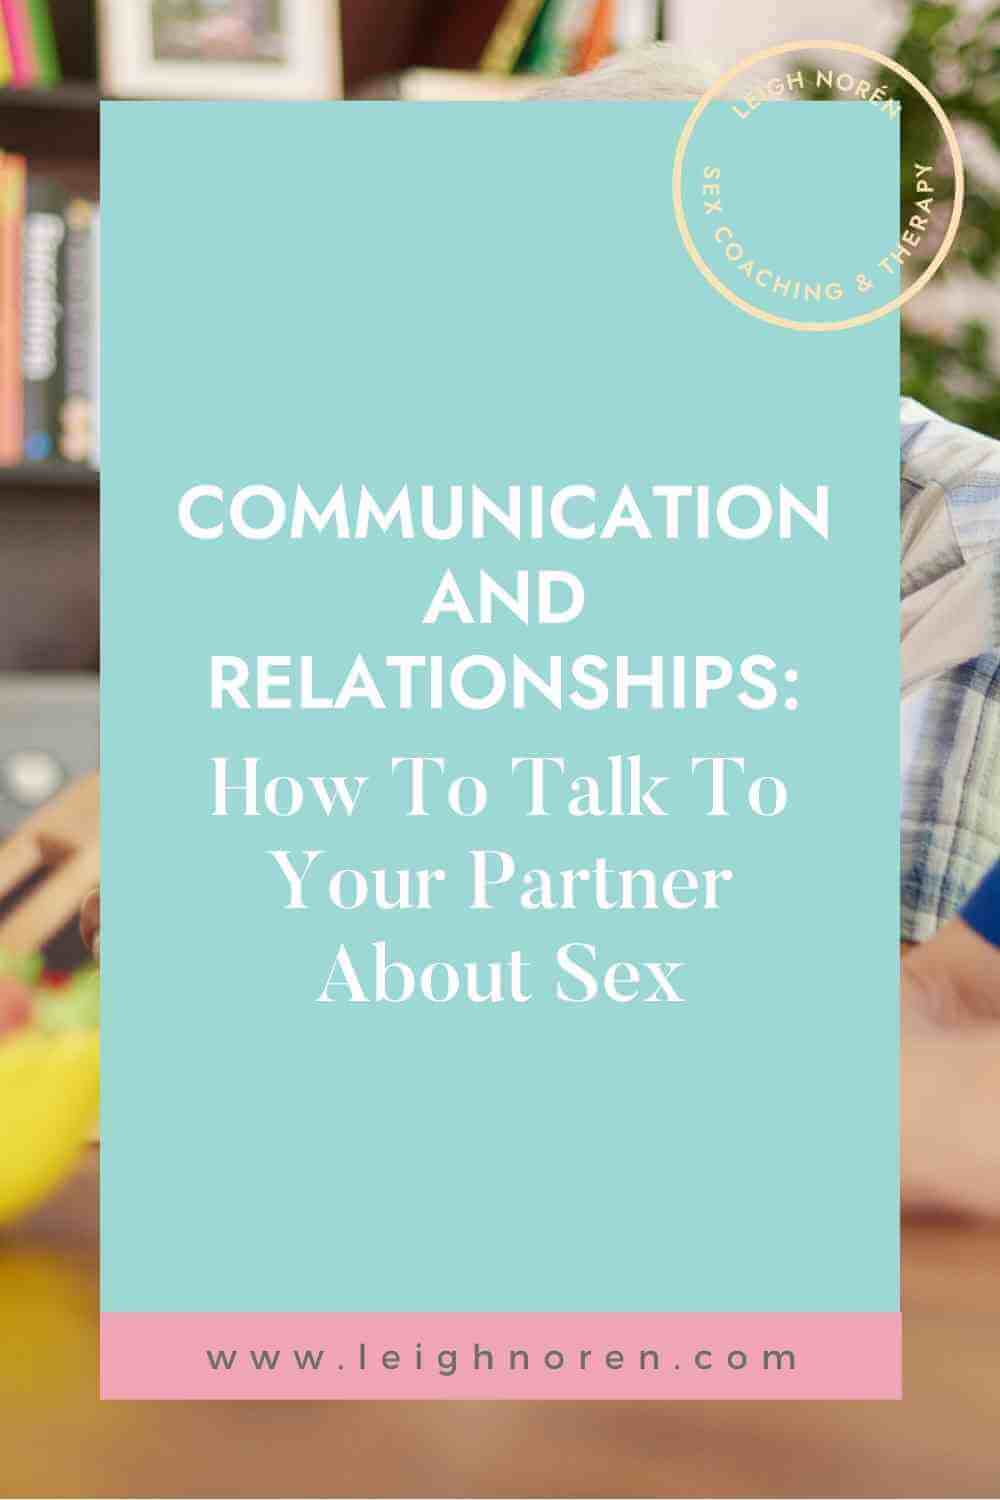 Communication And Relationships: How To Talk To Your Partner About Sex